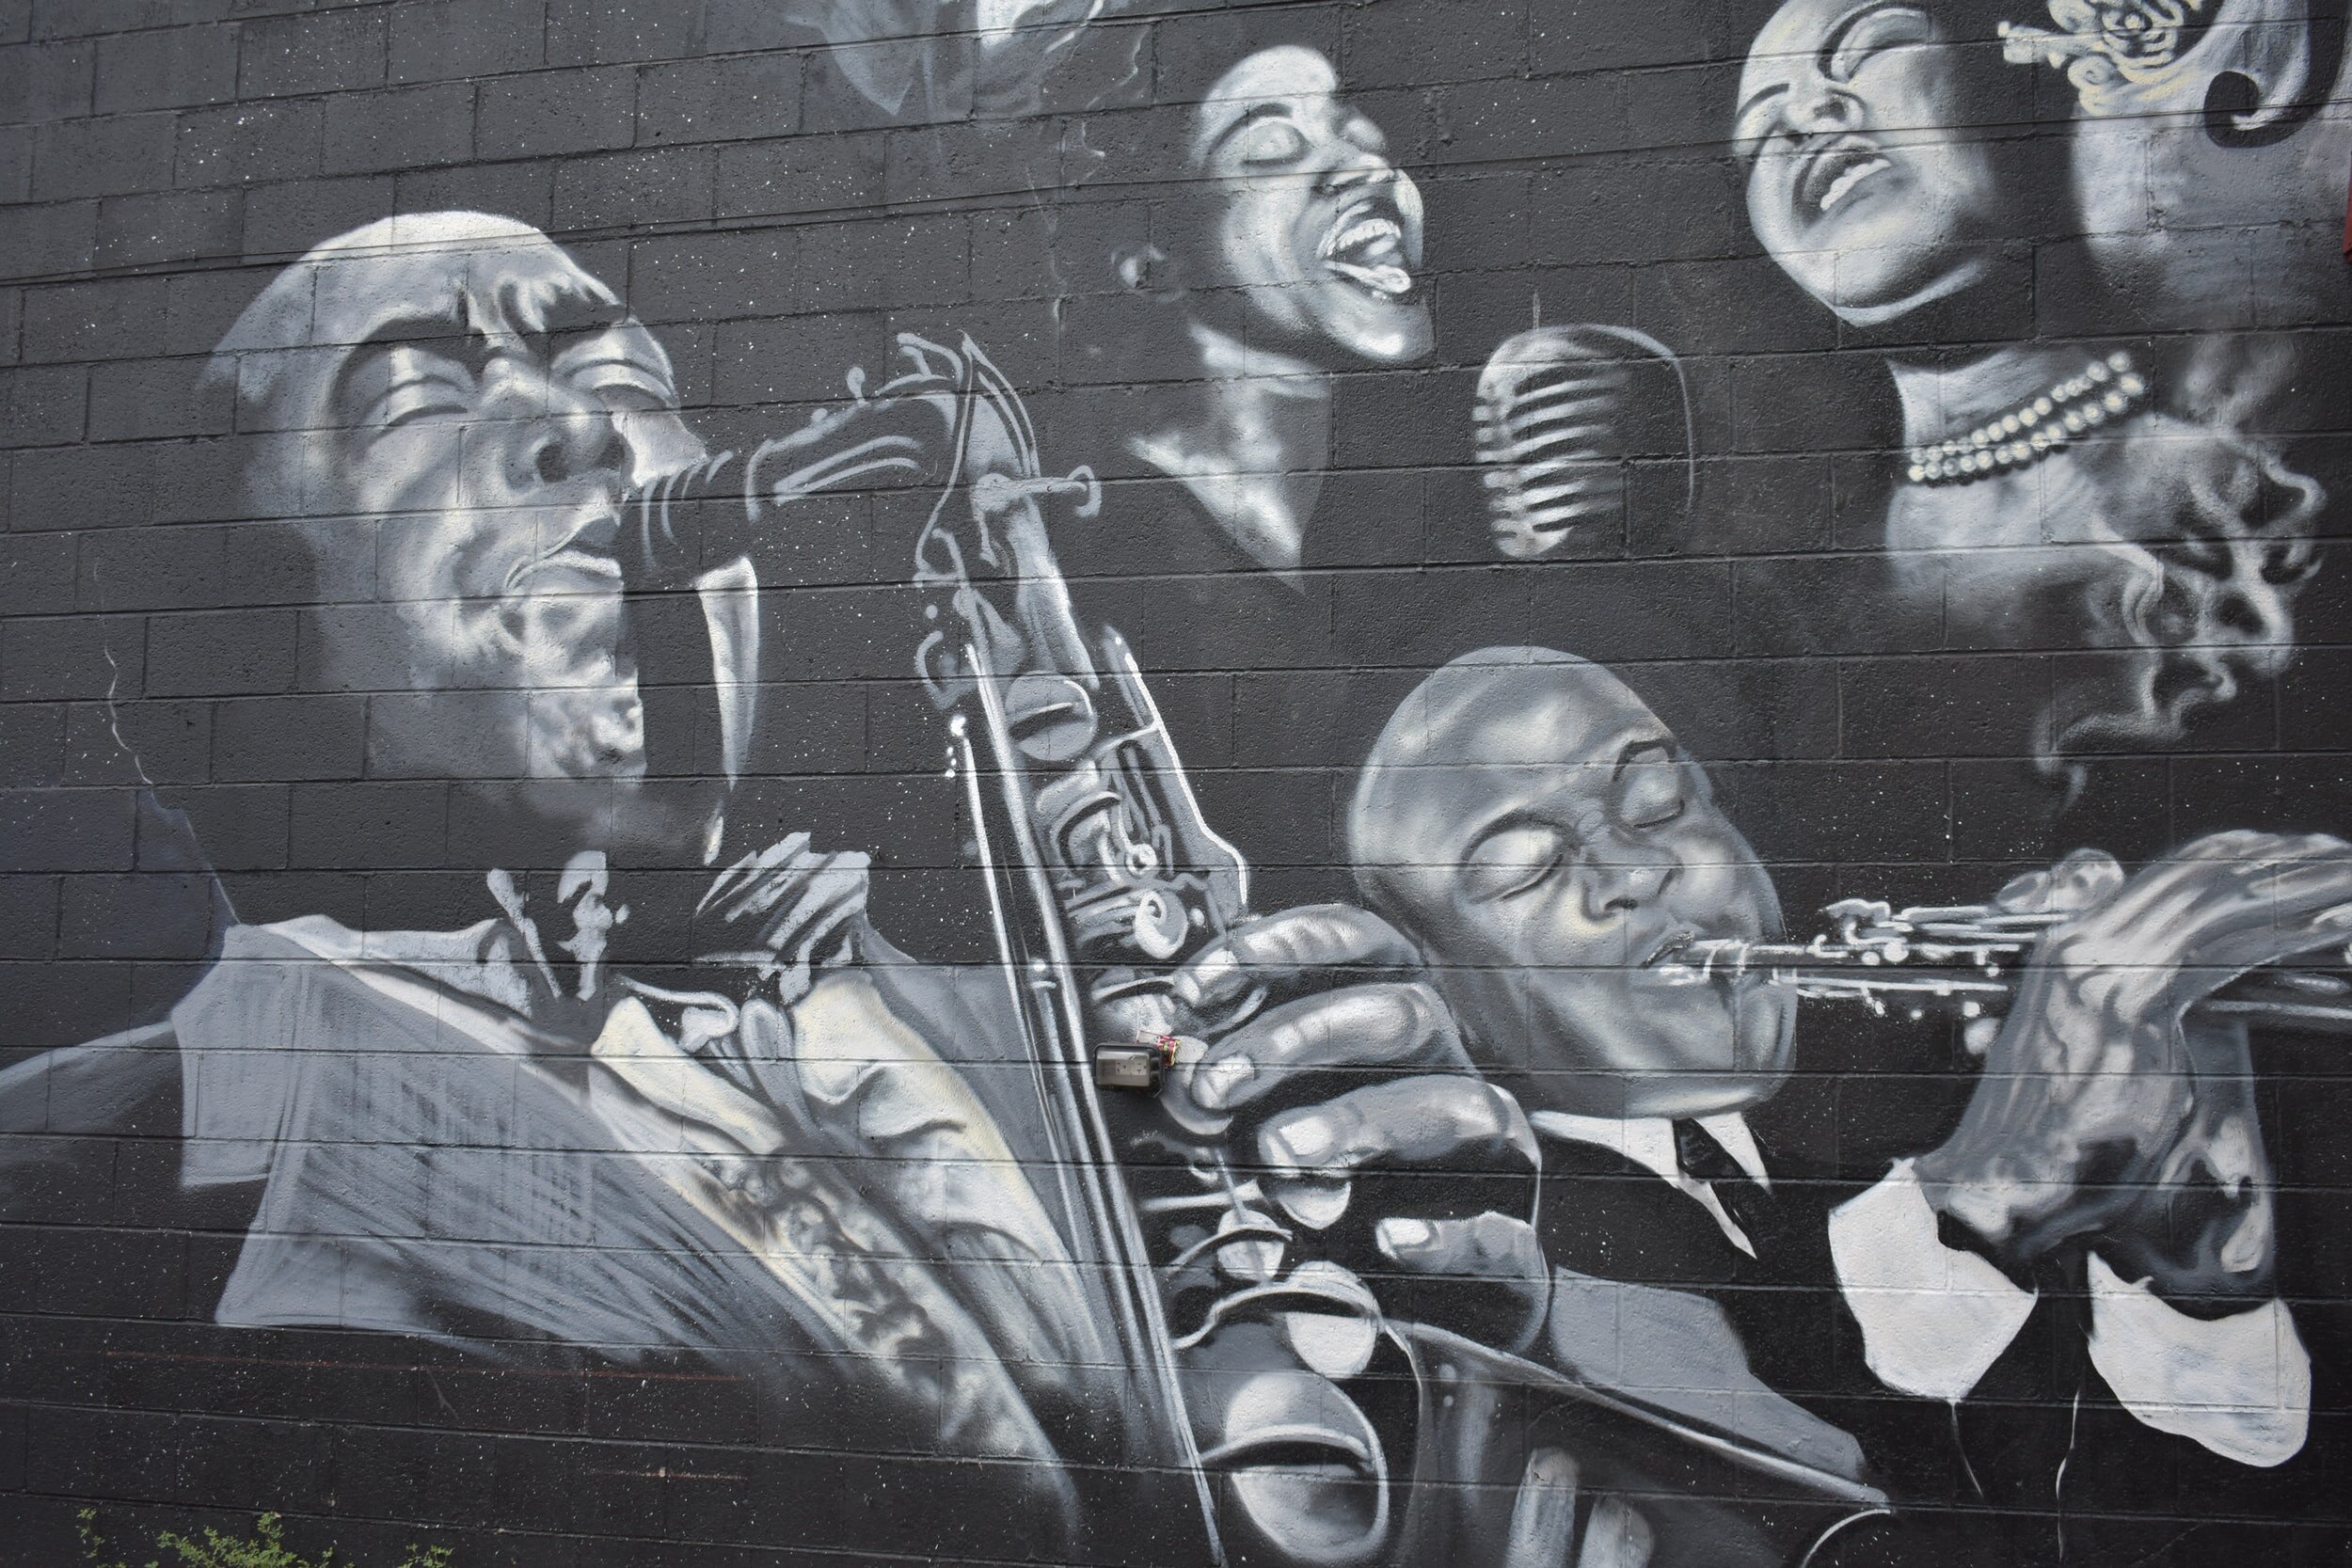 Louis Armstrong: Broke Down Barriers for African American Artists